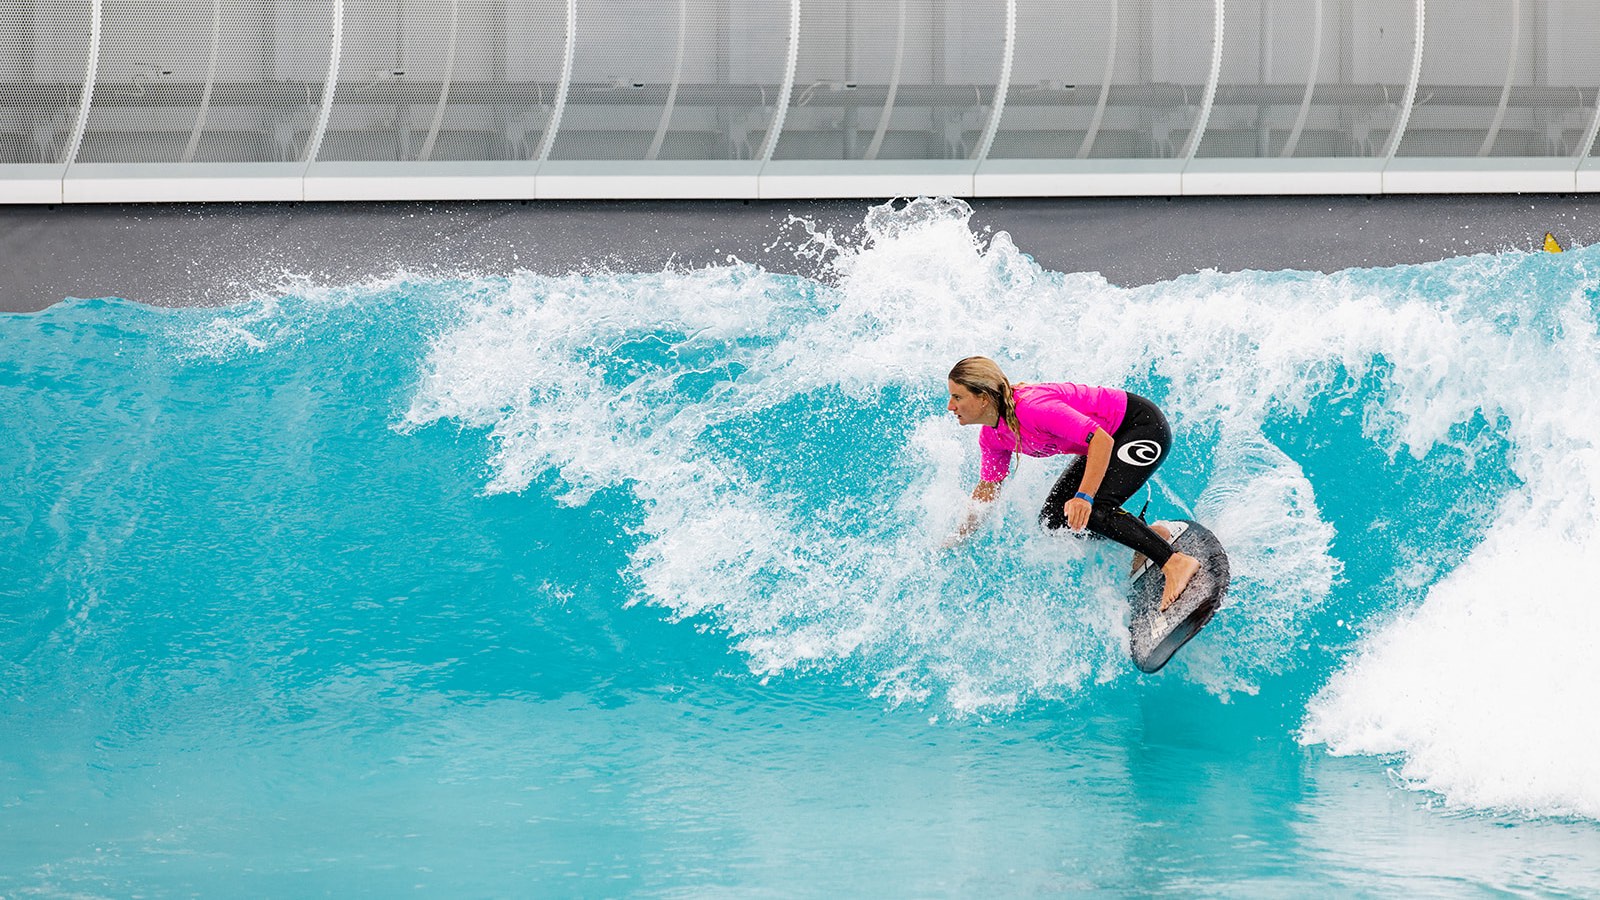 surfaid cup 2022 at the urbnsurf wave pool